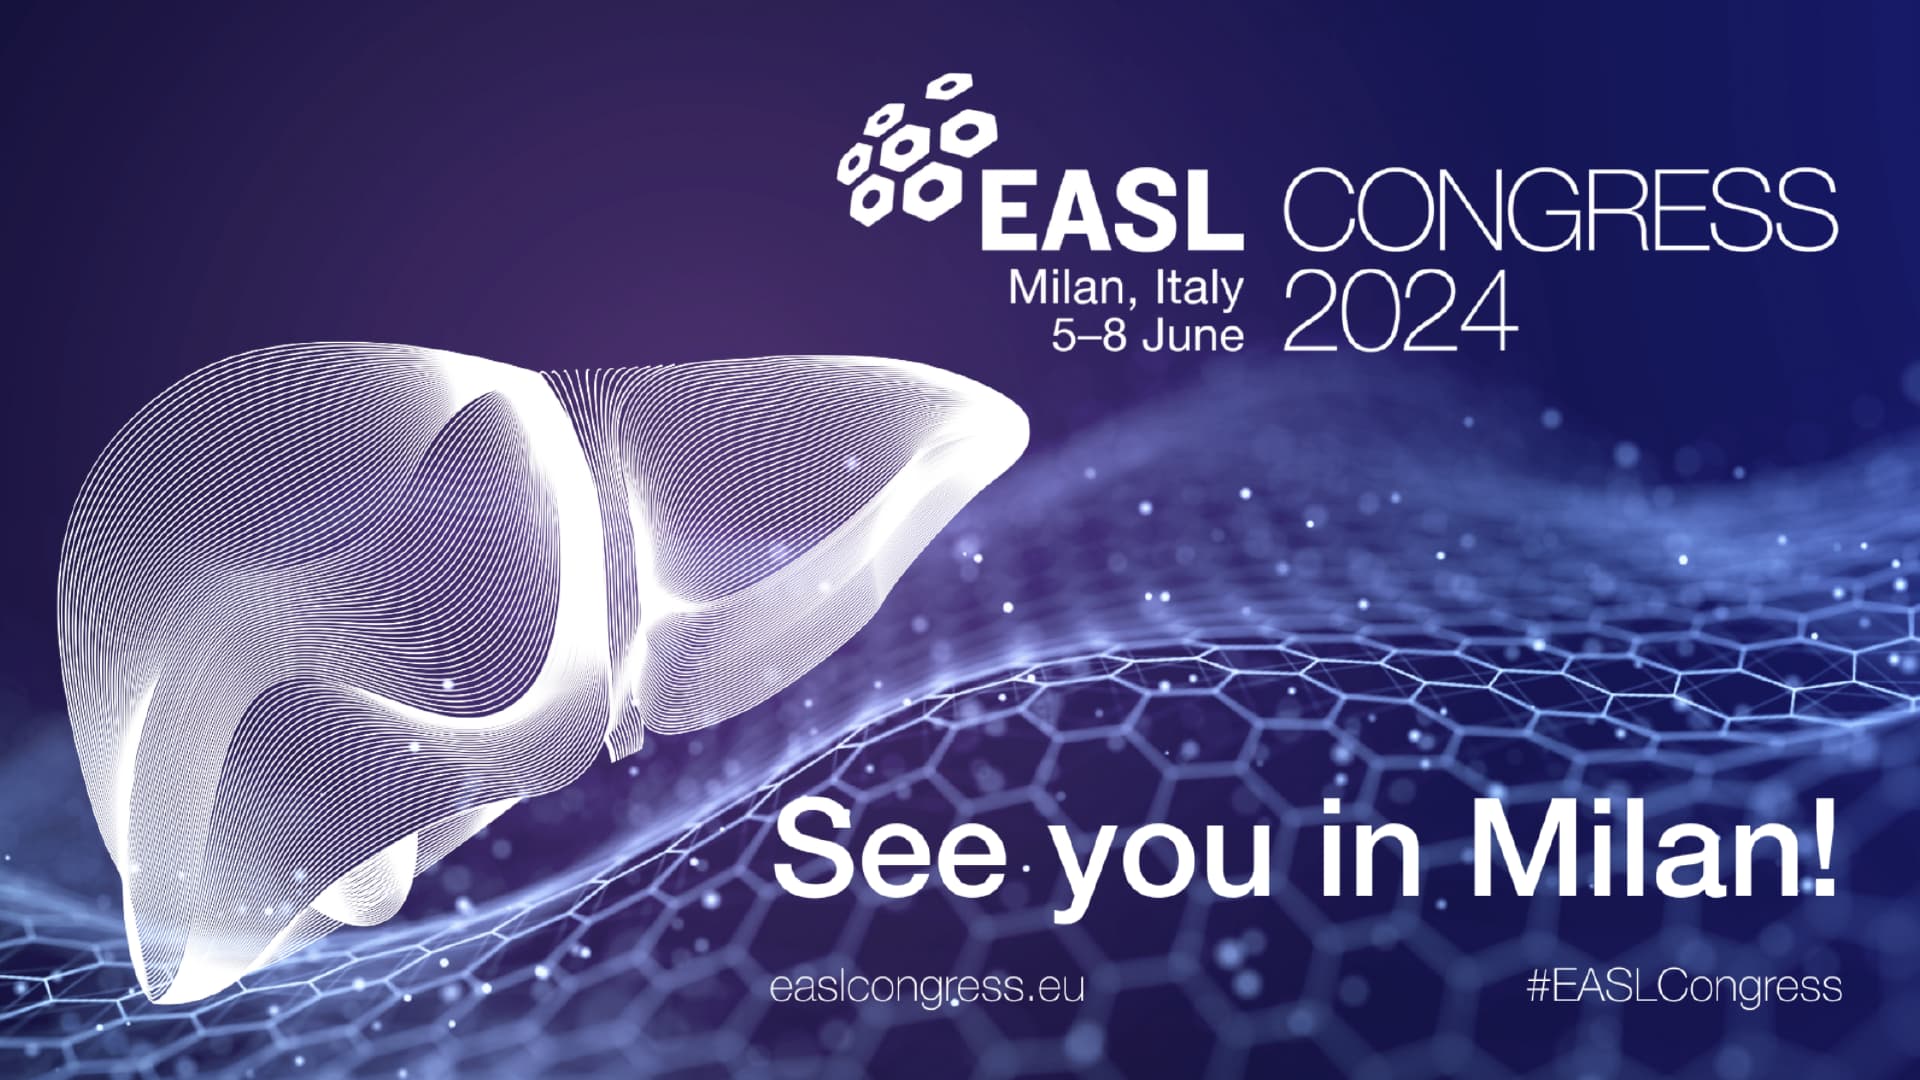 European Association for the Study of the Liver (EASL) Congress 2024